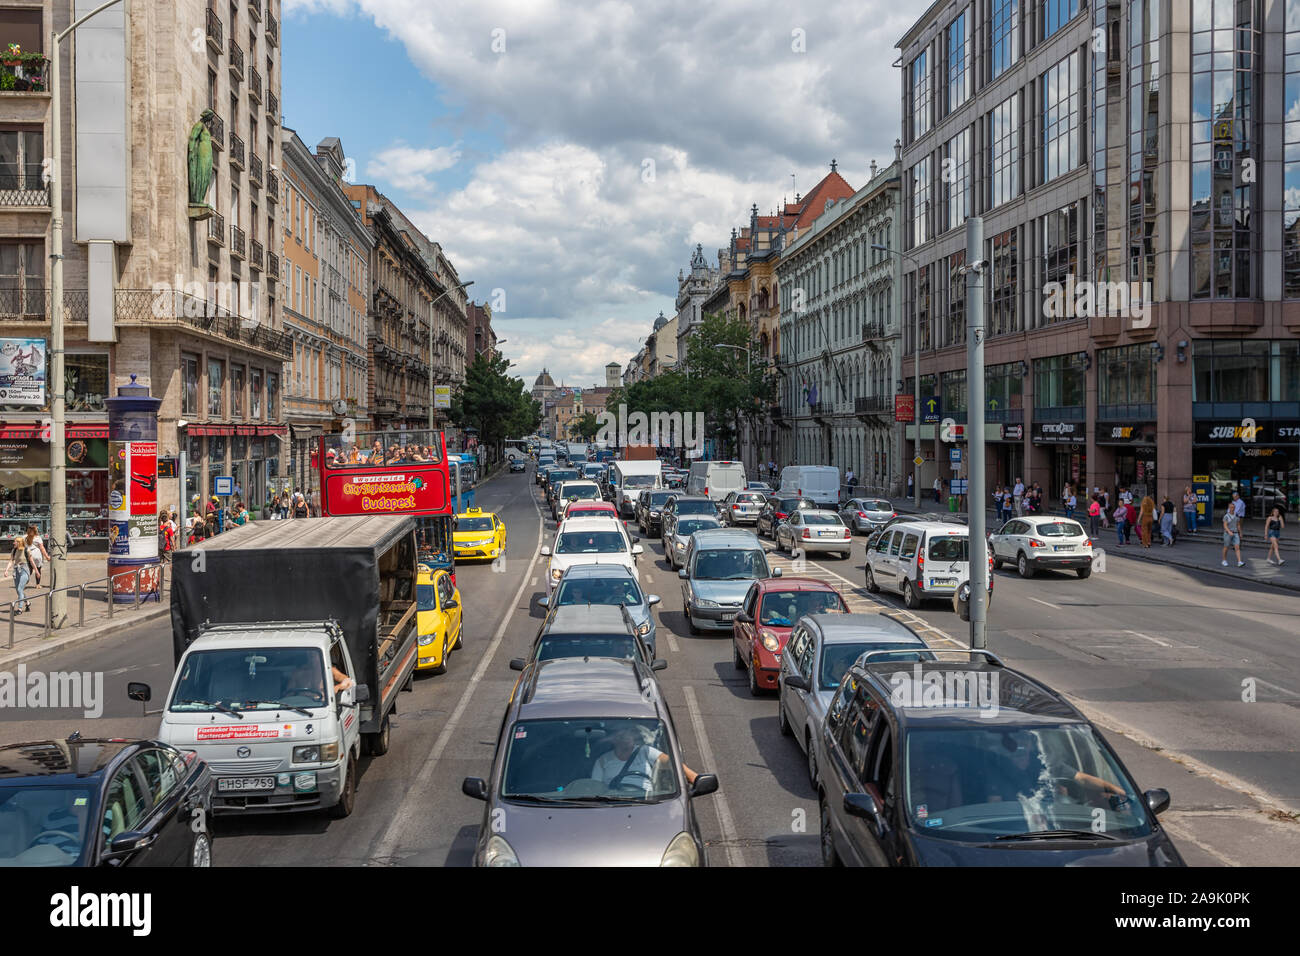 Shopping street downtown Budapest with traffic during rush hour Stock Photo  - Alamy